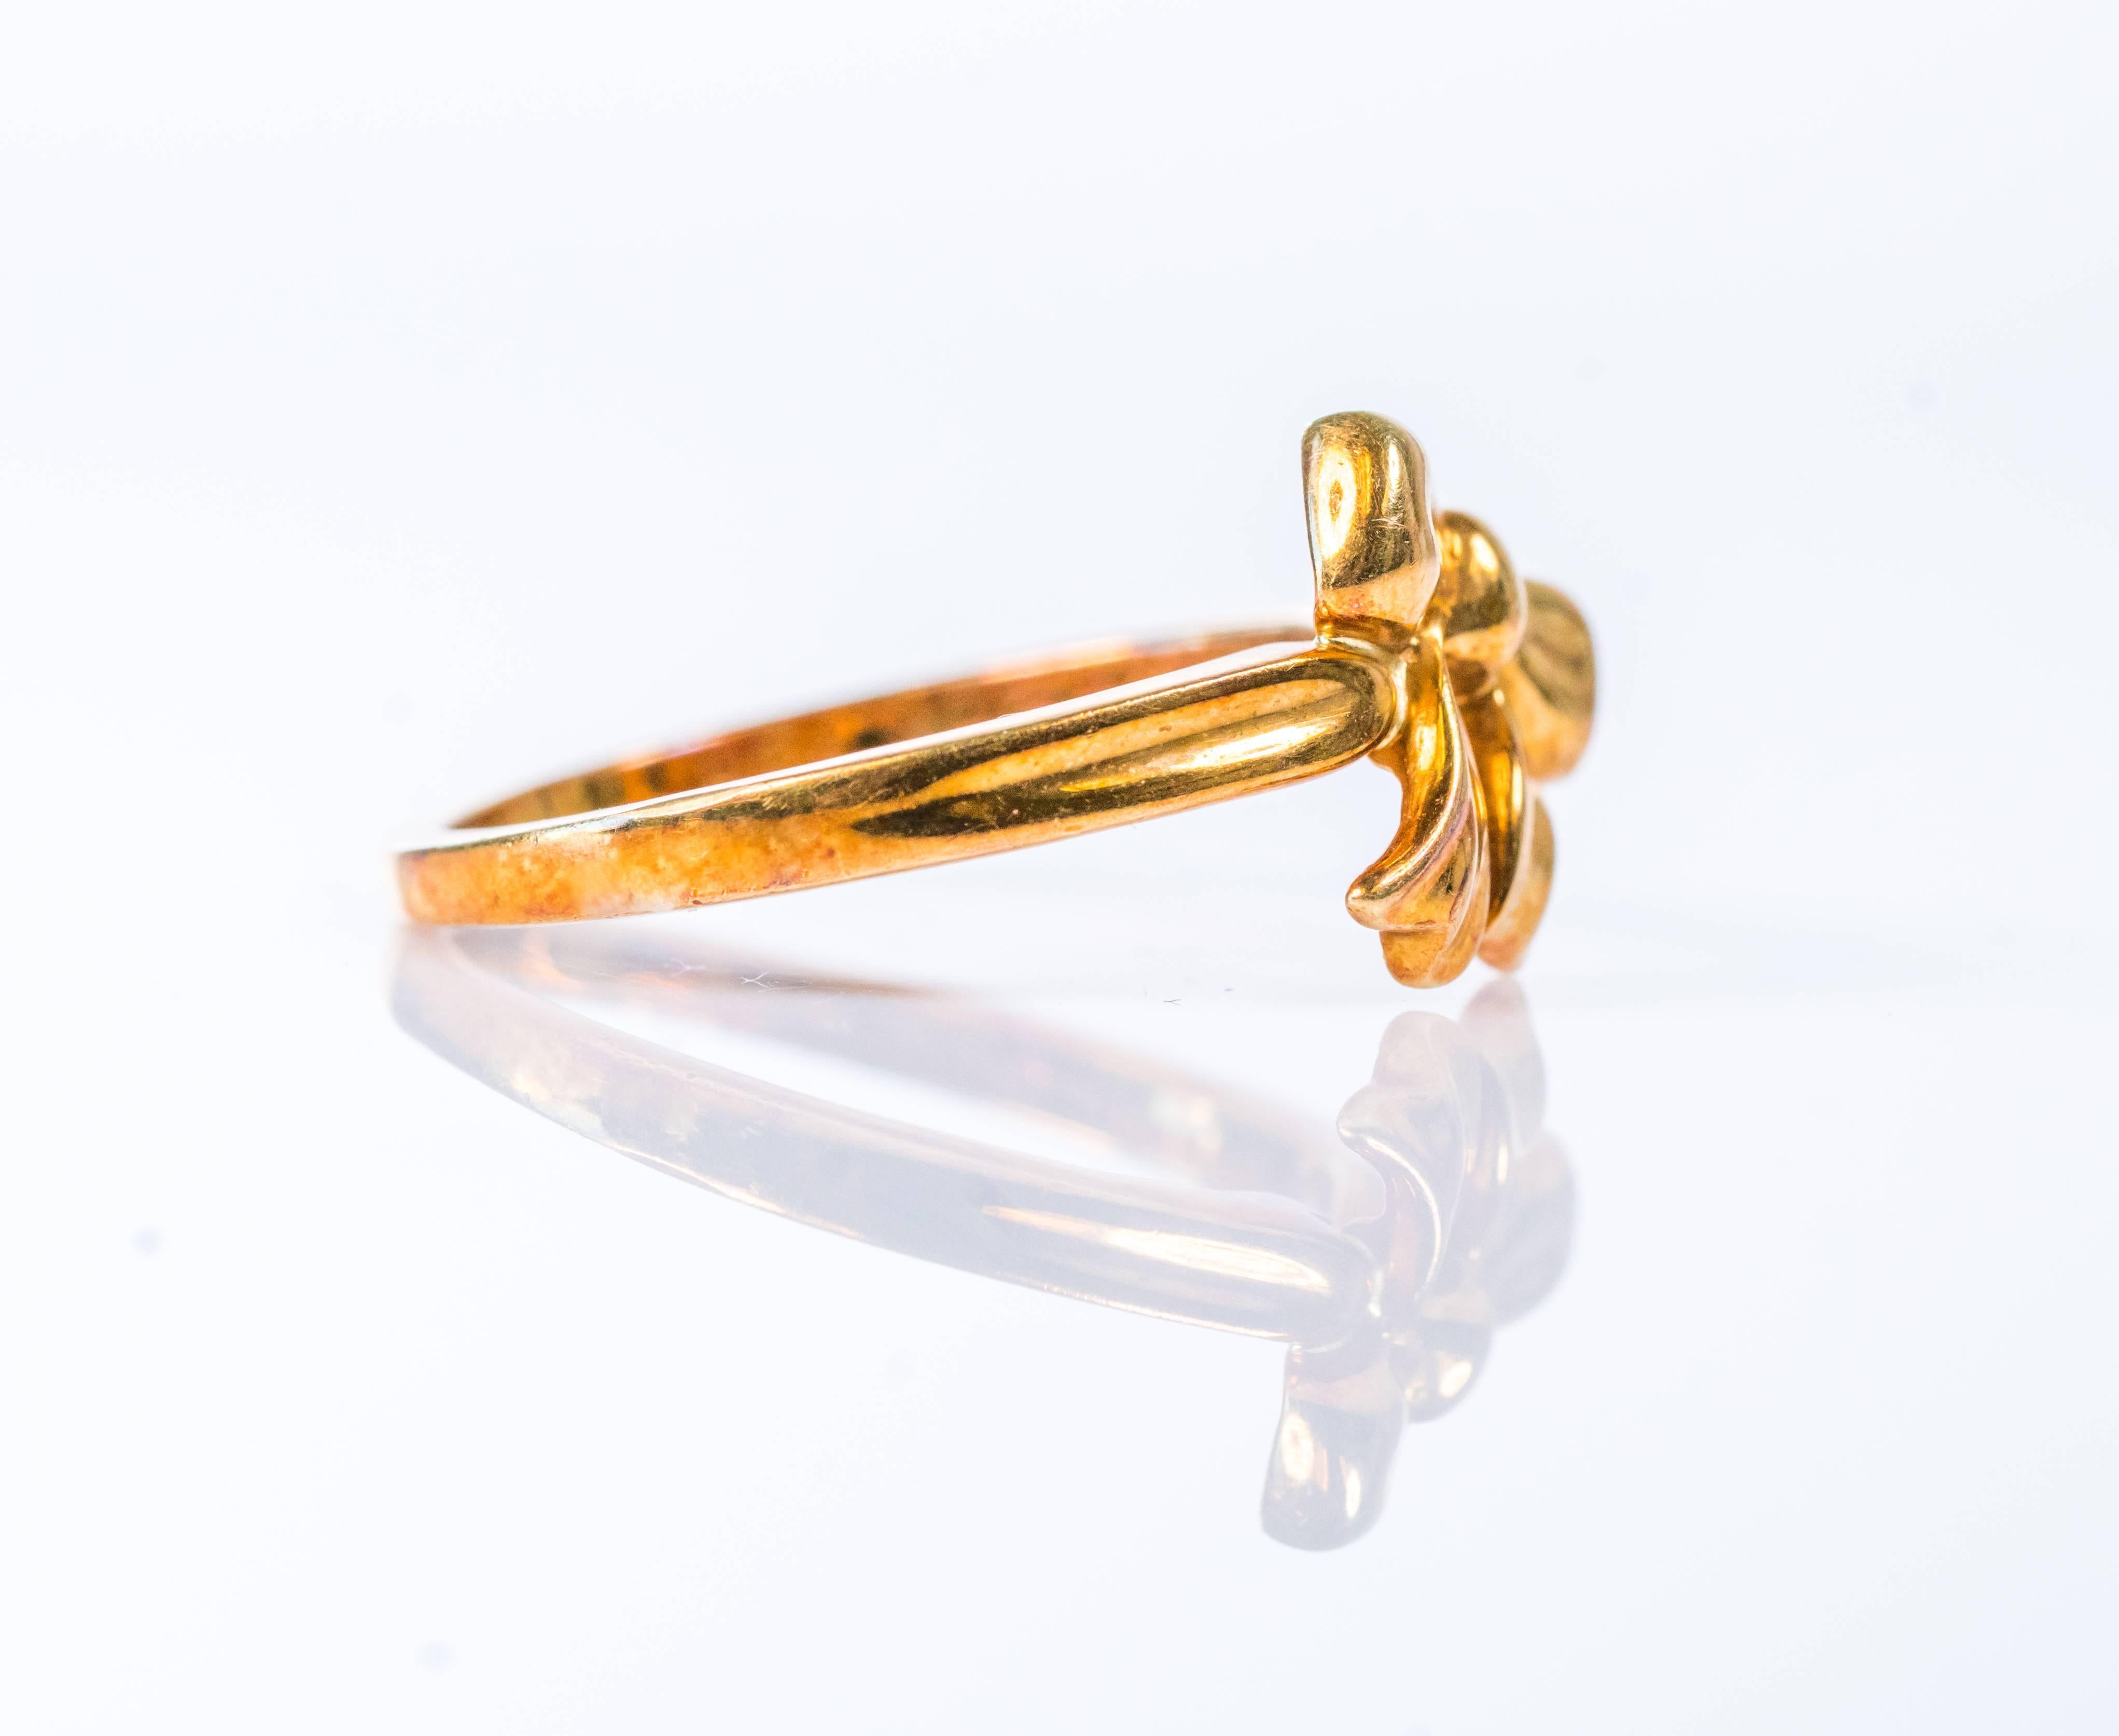 This 1980s Tiffany and Co. 18 karat yellow gold ribbon bow ring features 5.2 grams of 18 karat yellow gold. This ring is size 8.25 and can be resized. The inner shank is Hallmarked Tiffany & Co. 750. This sweet, feminine ring adds a dainty touch to